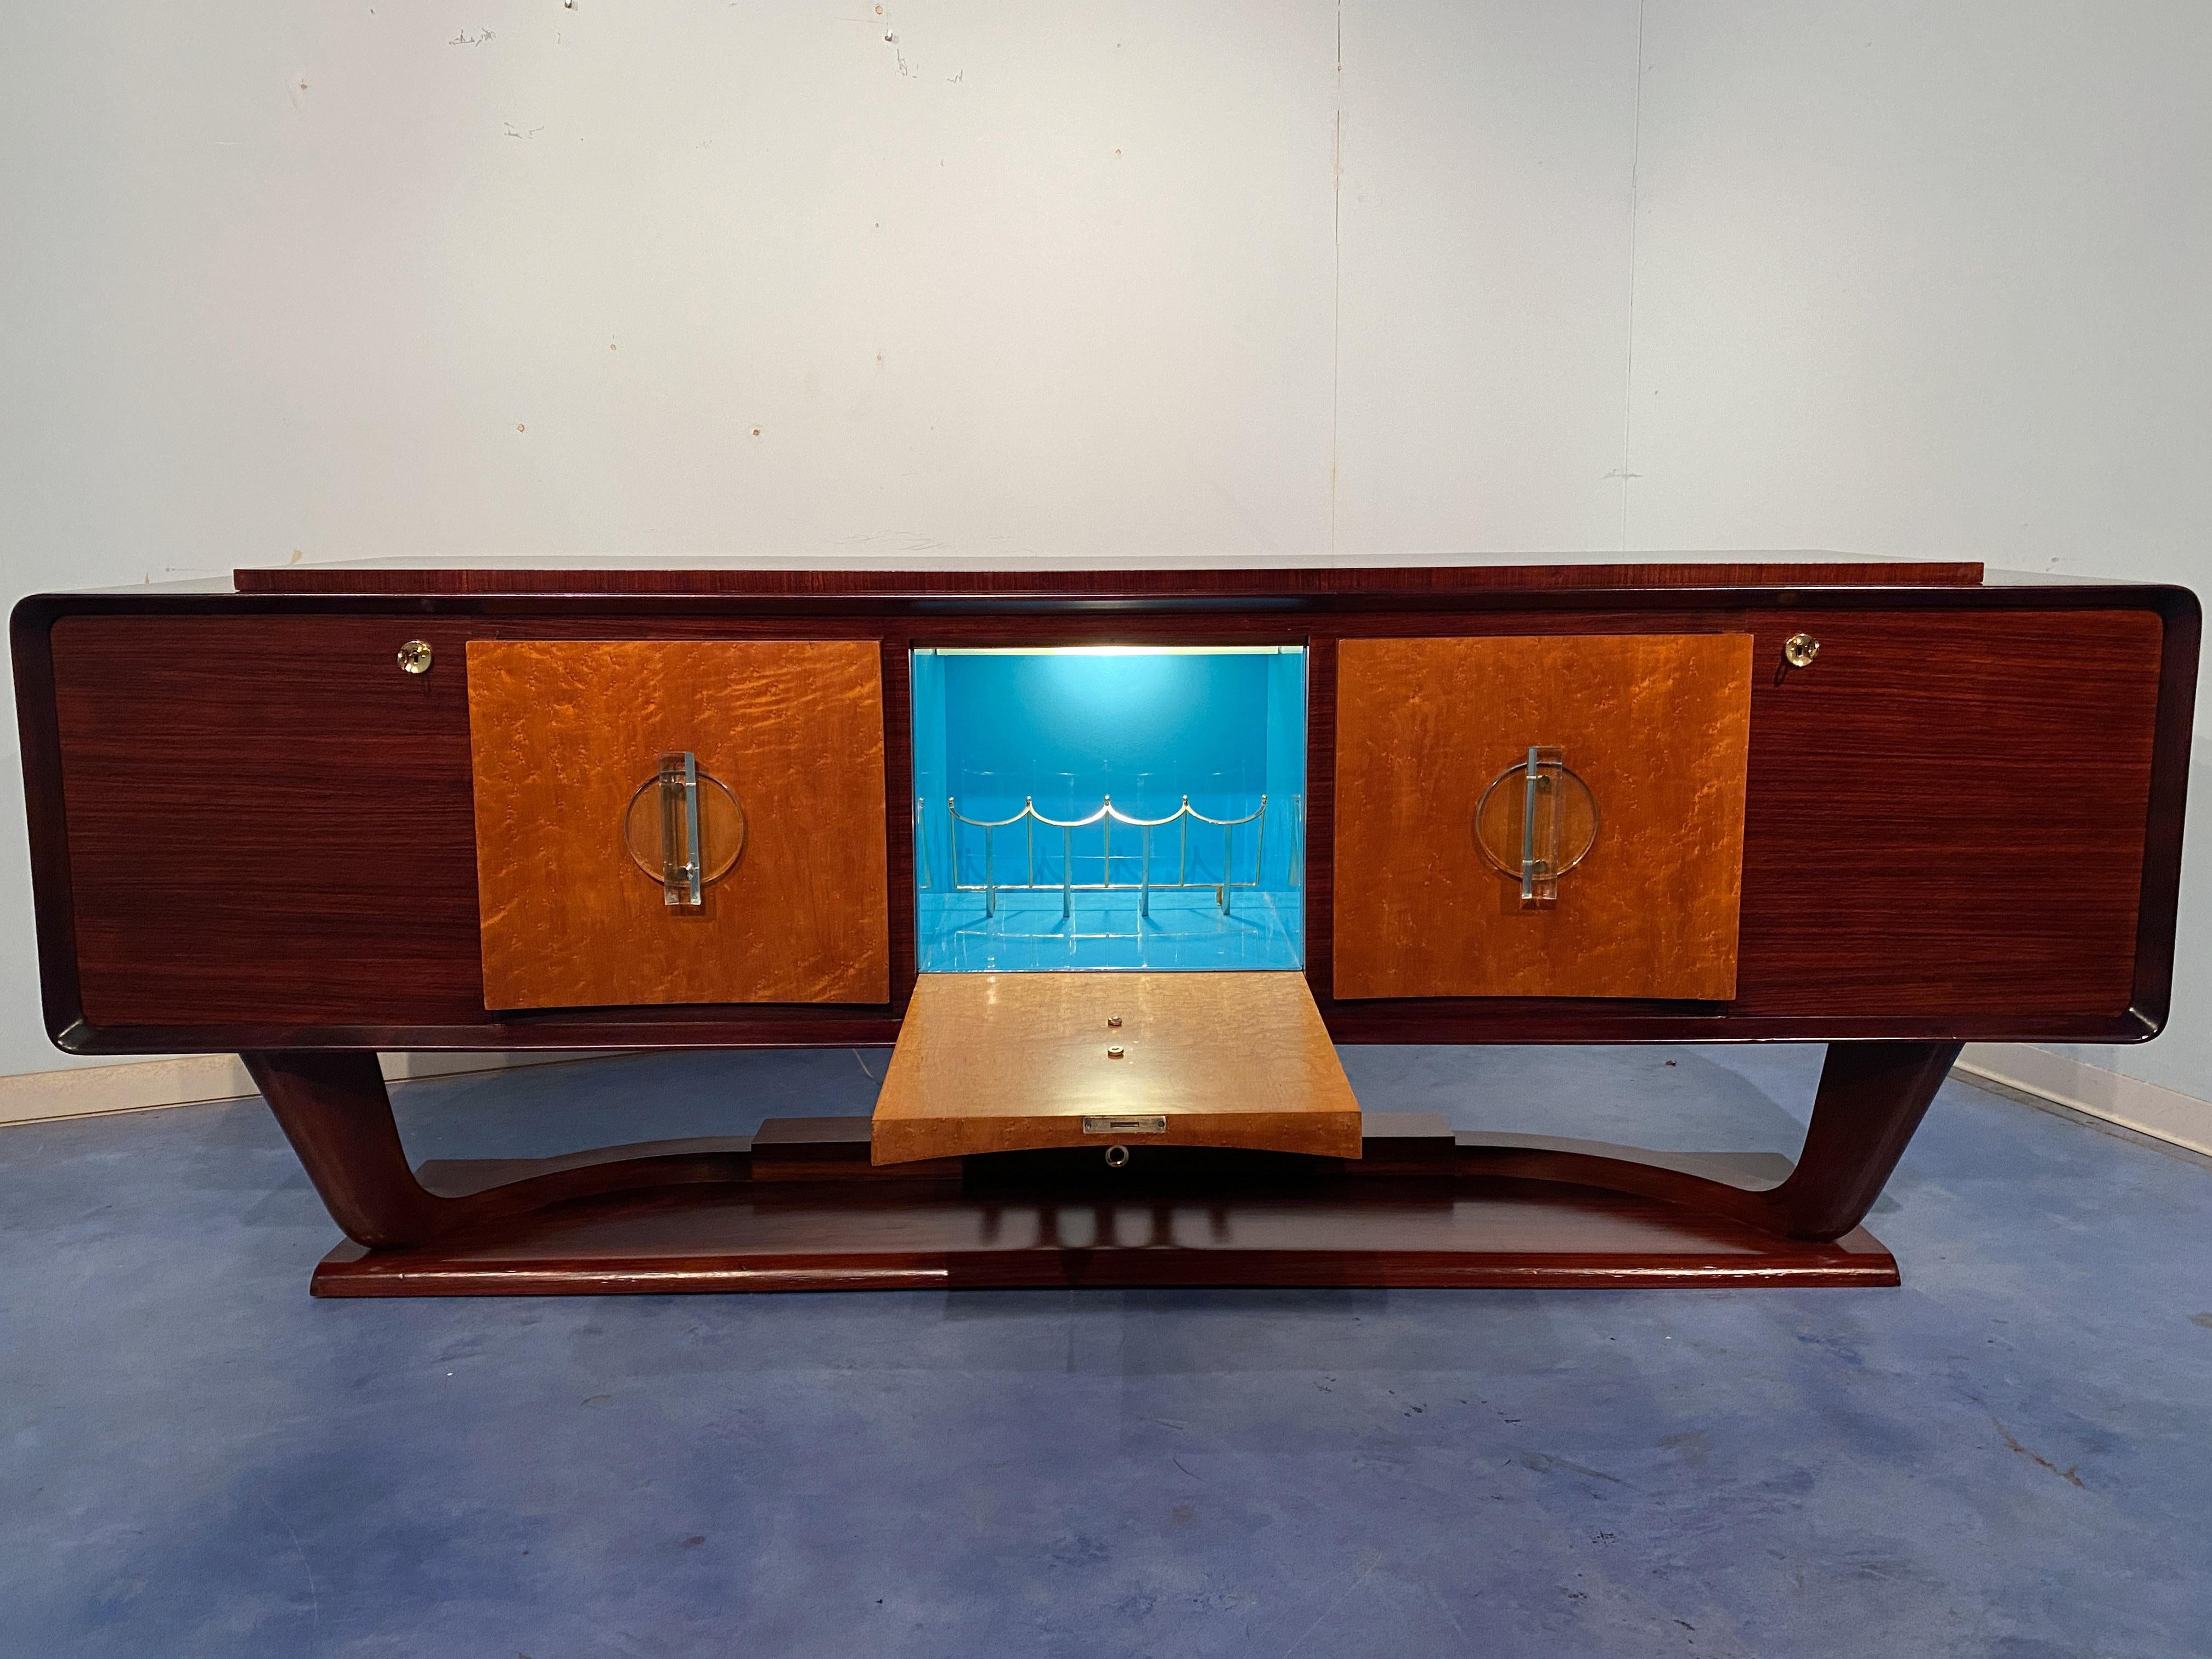 Italian Art Deco Sideboard with Bar Cabinet Attributed to Osvaldo Borsani, 1940s For Sale 13